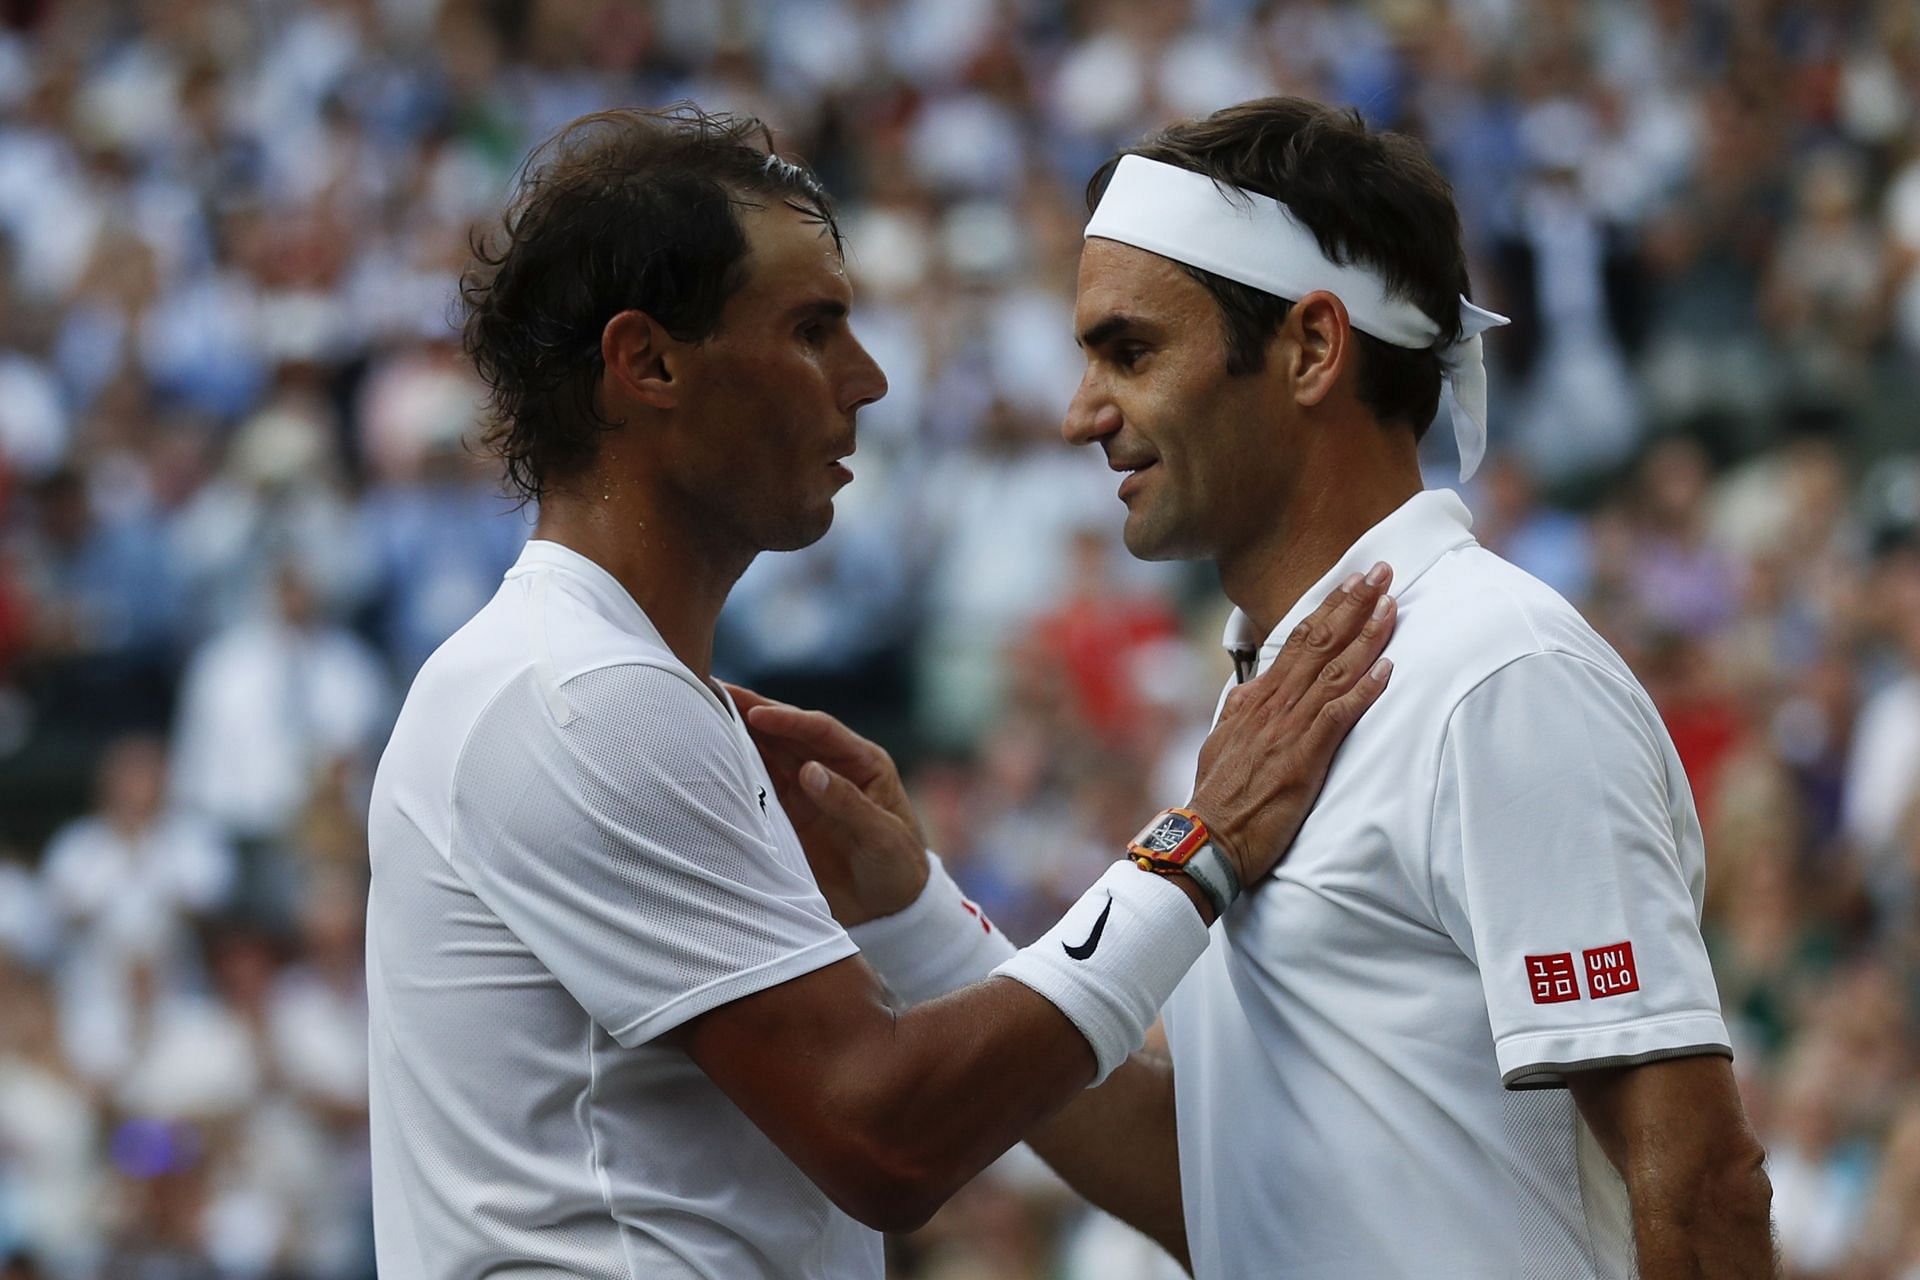 Rafael Nadal and Roger Federer after their last meeting in Wimbledon 2019